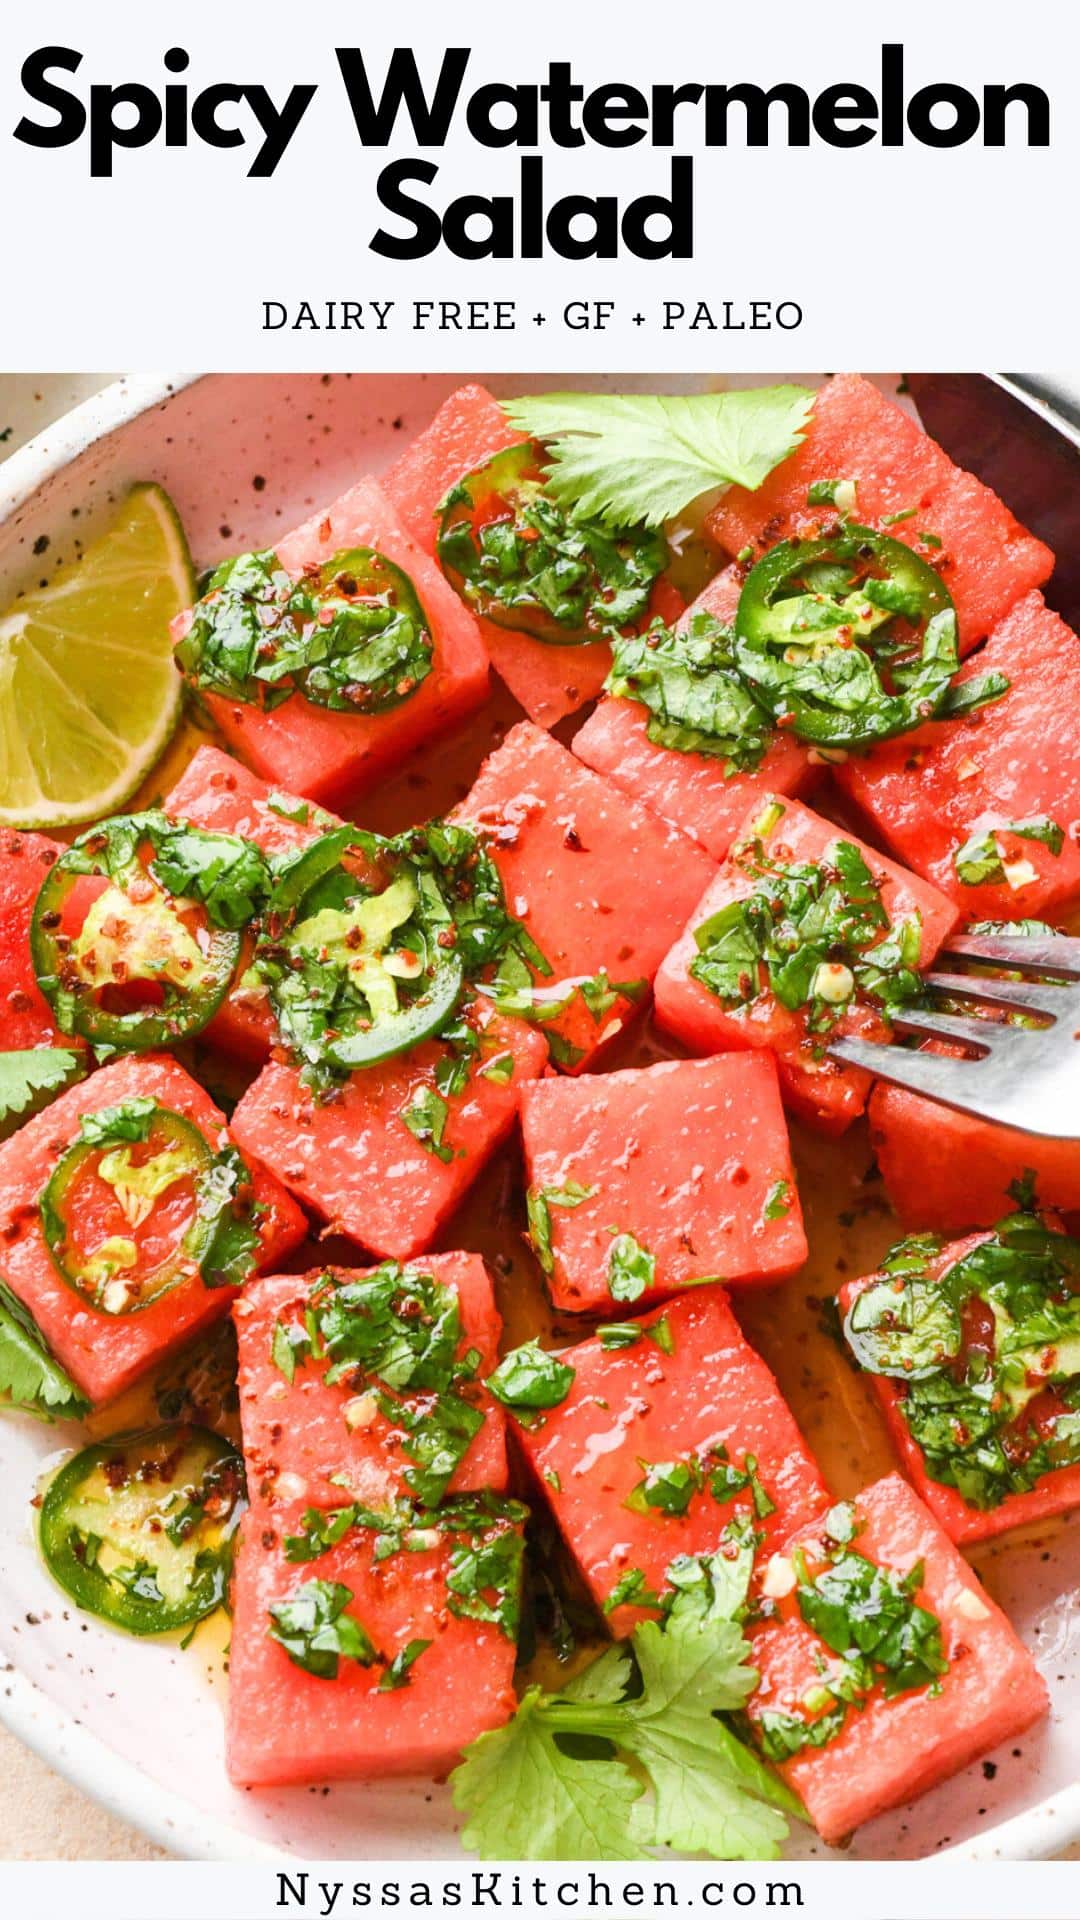 This spicy watermelon salad with cilantro and lime is a real crowd-pleasing delight during the warm summer months! It's spicy, sweet, and draped in a bright and citrusy dressing for the ultimate watermelon salad experience. Refreshing and FULL of summer flavor! GF, dairy free, vegetarian, paleo, vegan option, Whole30 option.